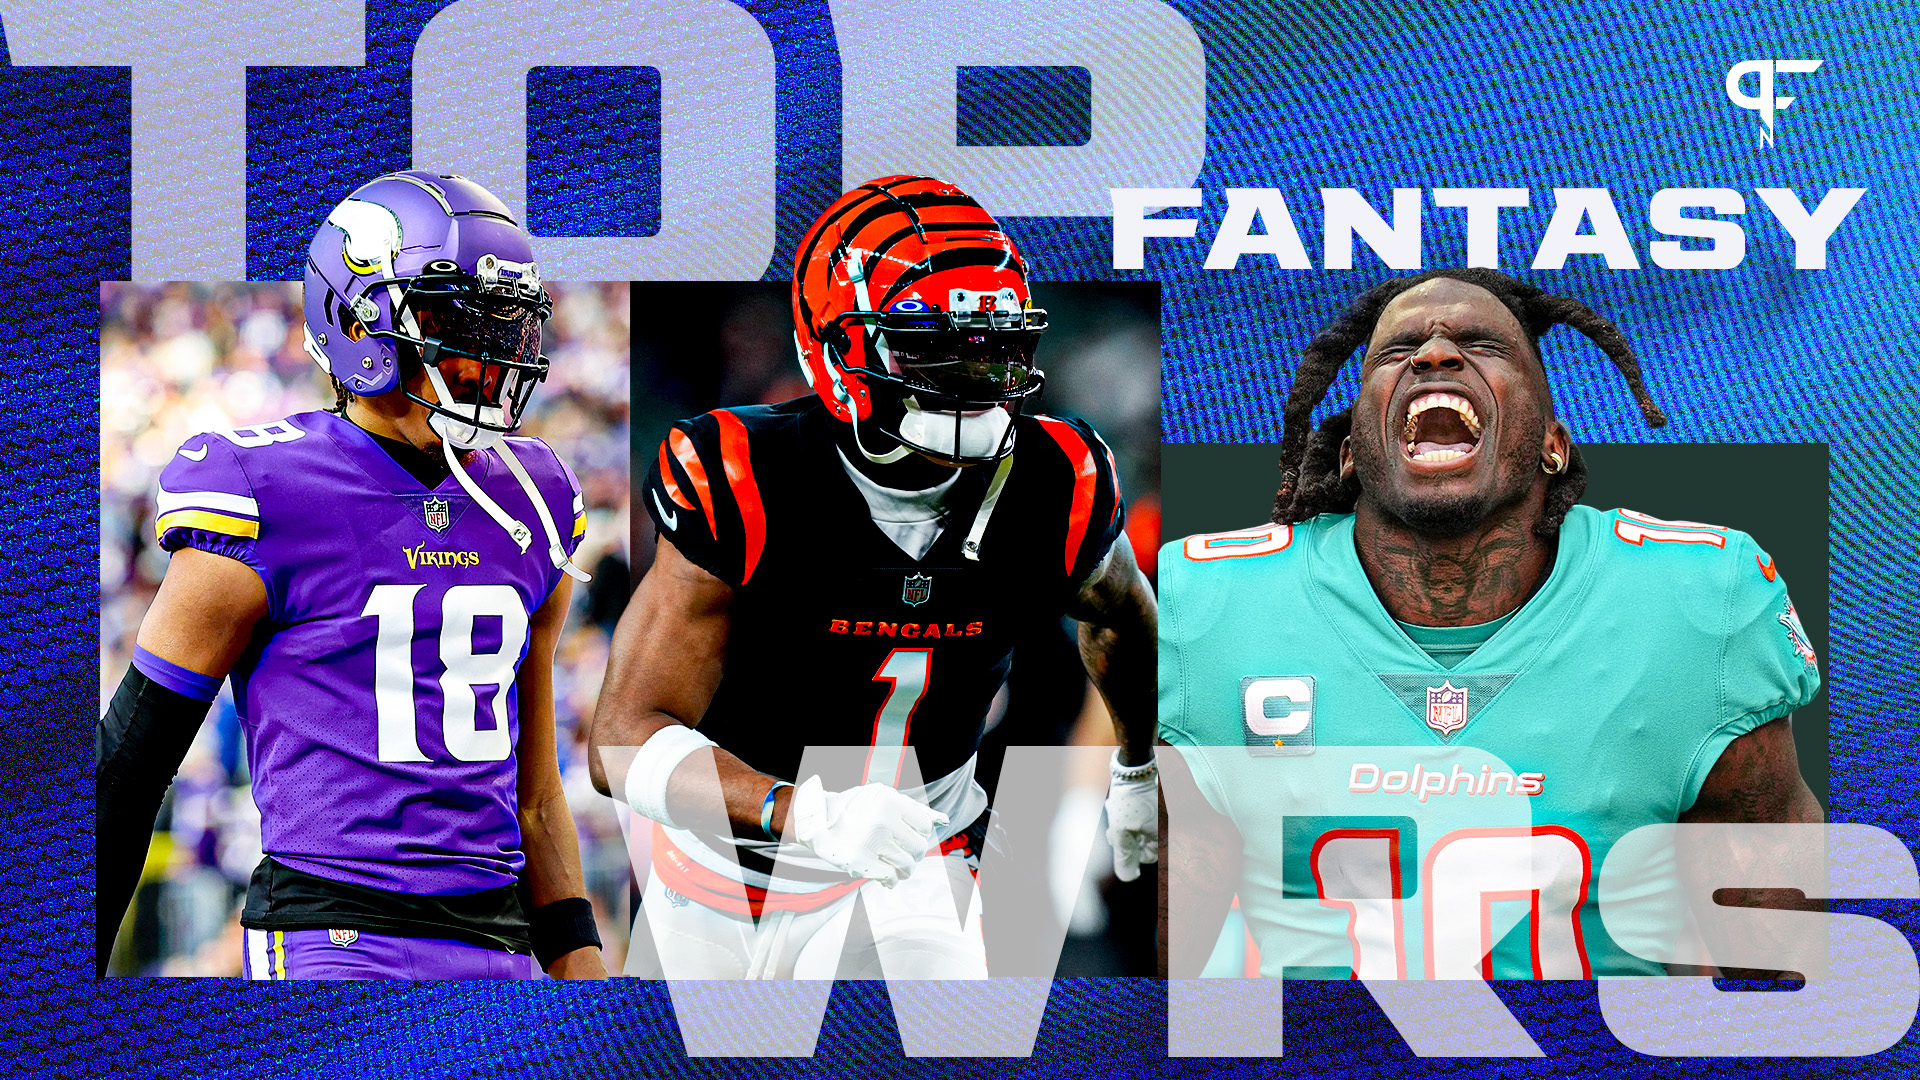 Redraft Rankings 2023: Top Fantasy Options at WR Include Justin Jefferson, Cooper Kupp, and Amon-Ra St. Brown